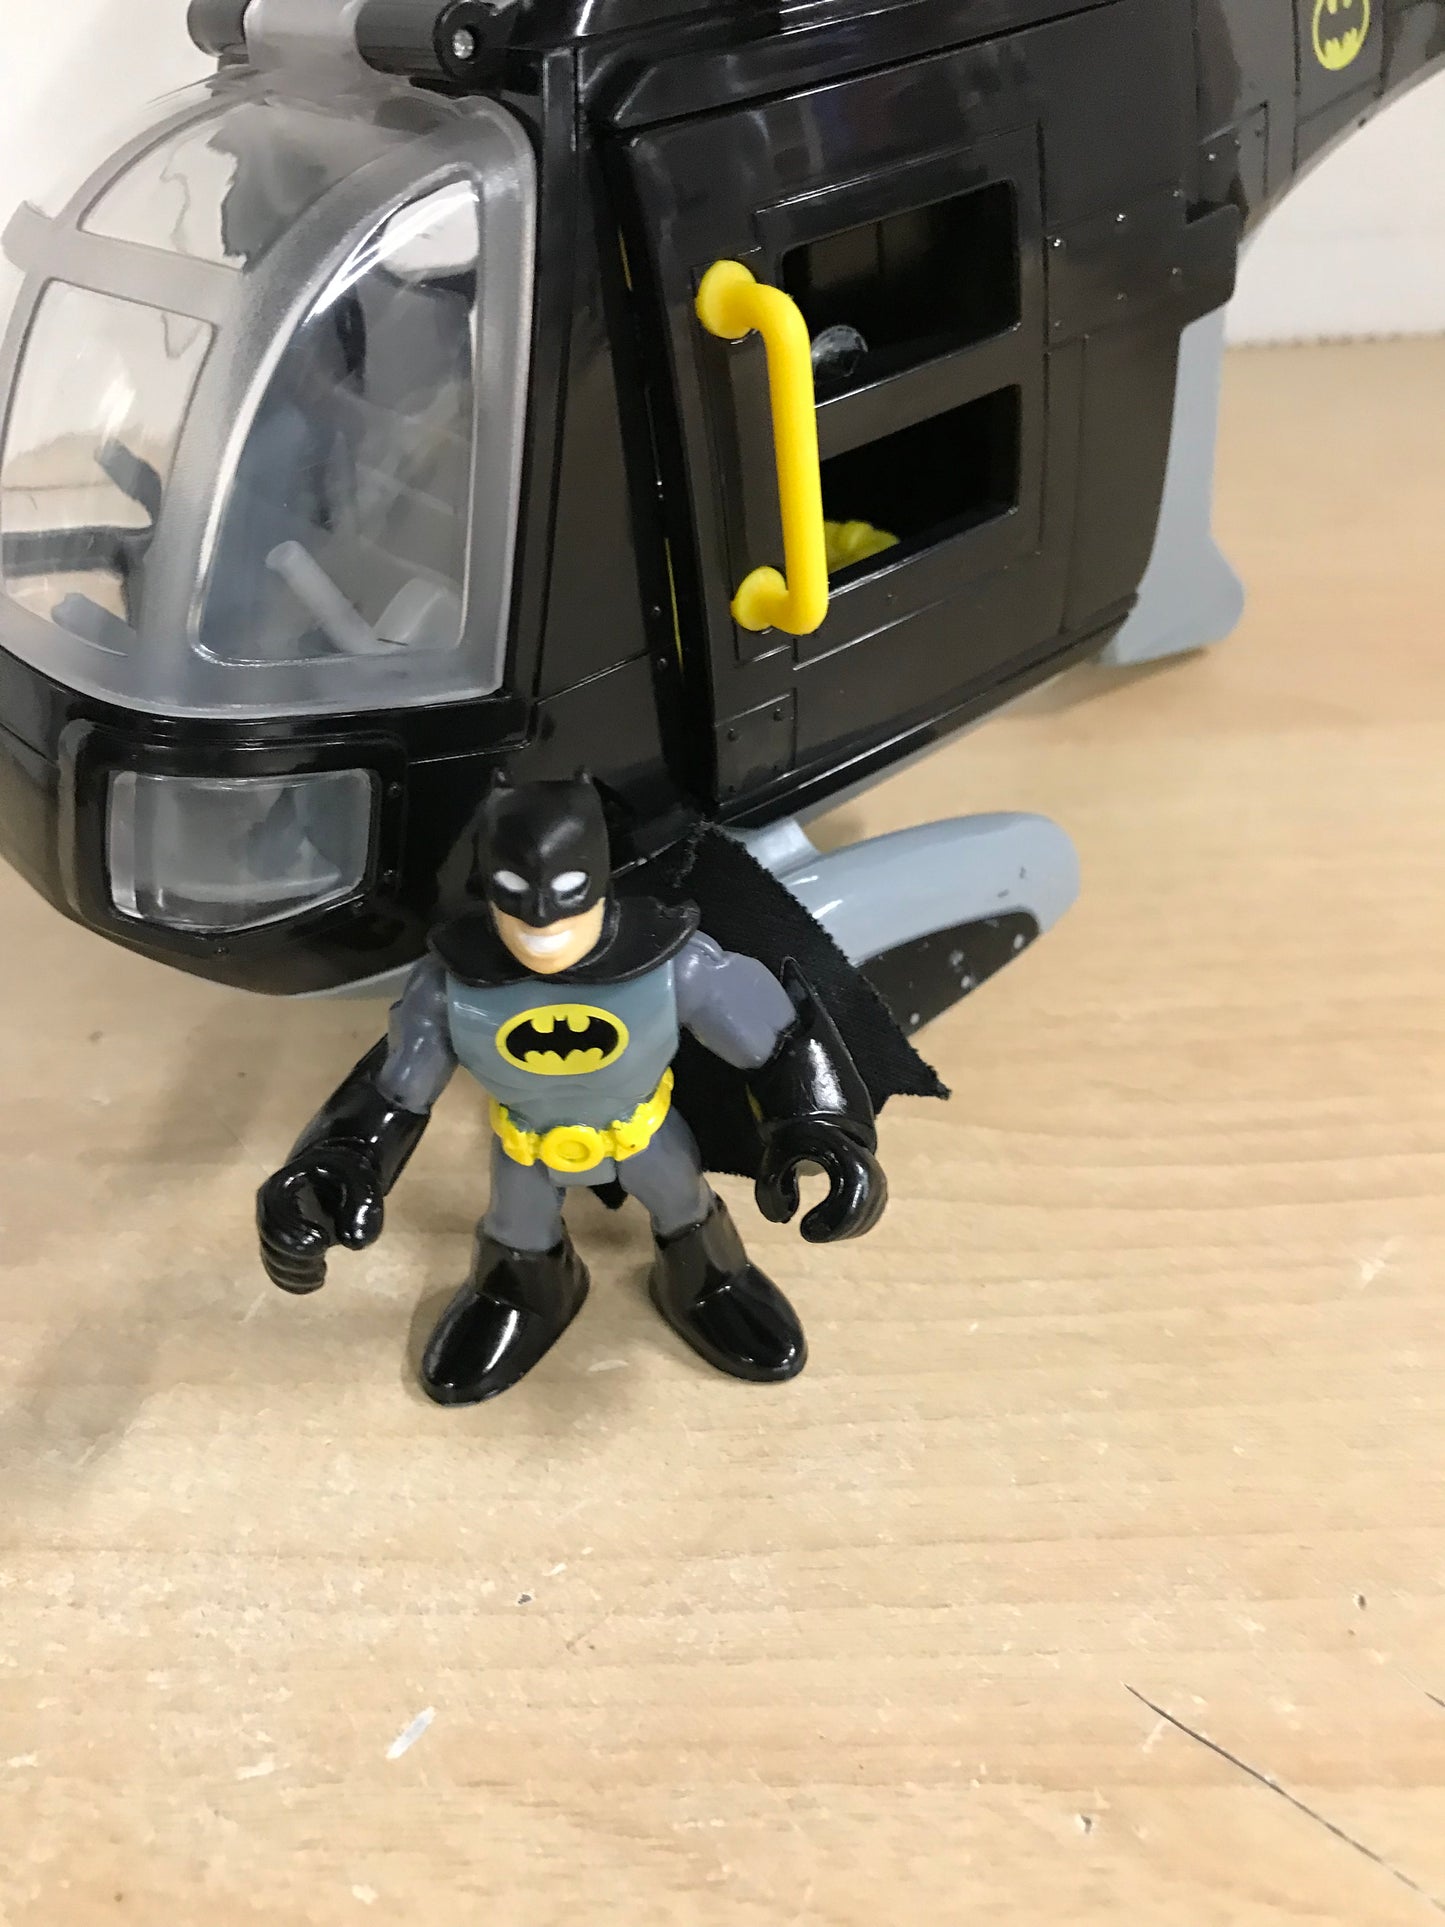 Batman Fisher Price Imaginext Gotham City Helicopter As New